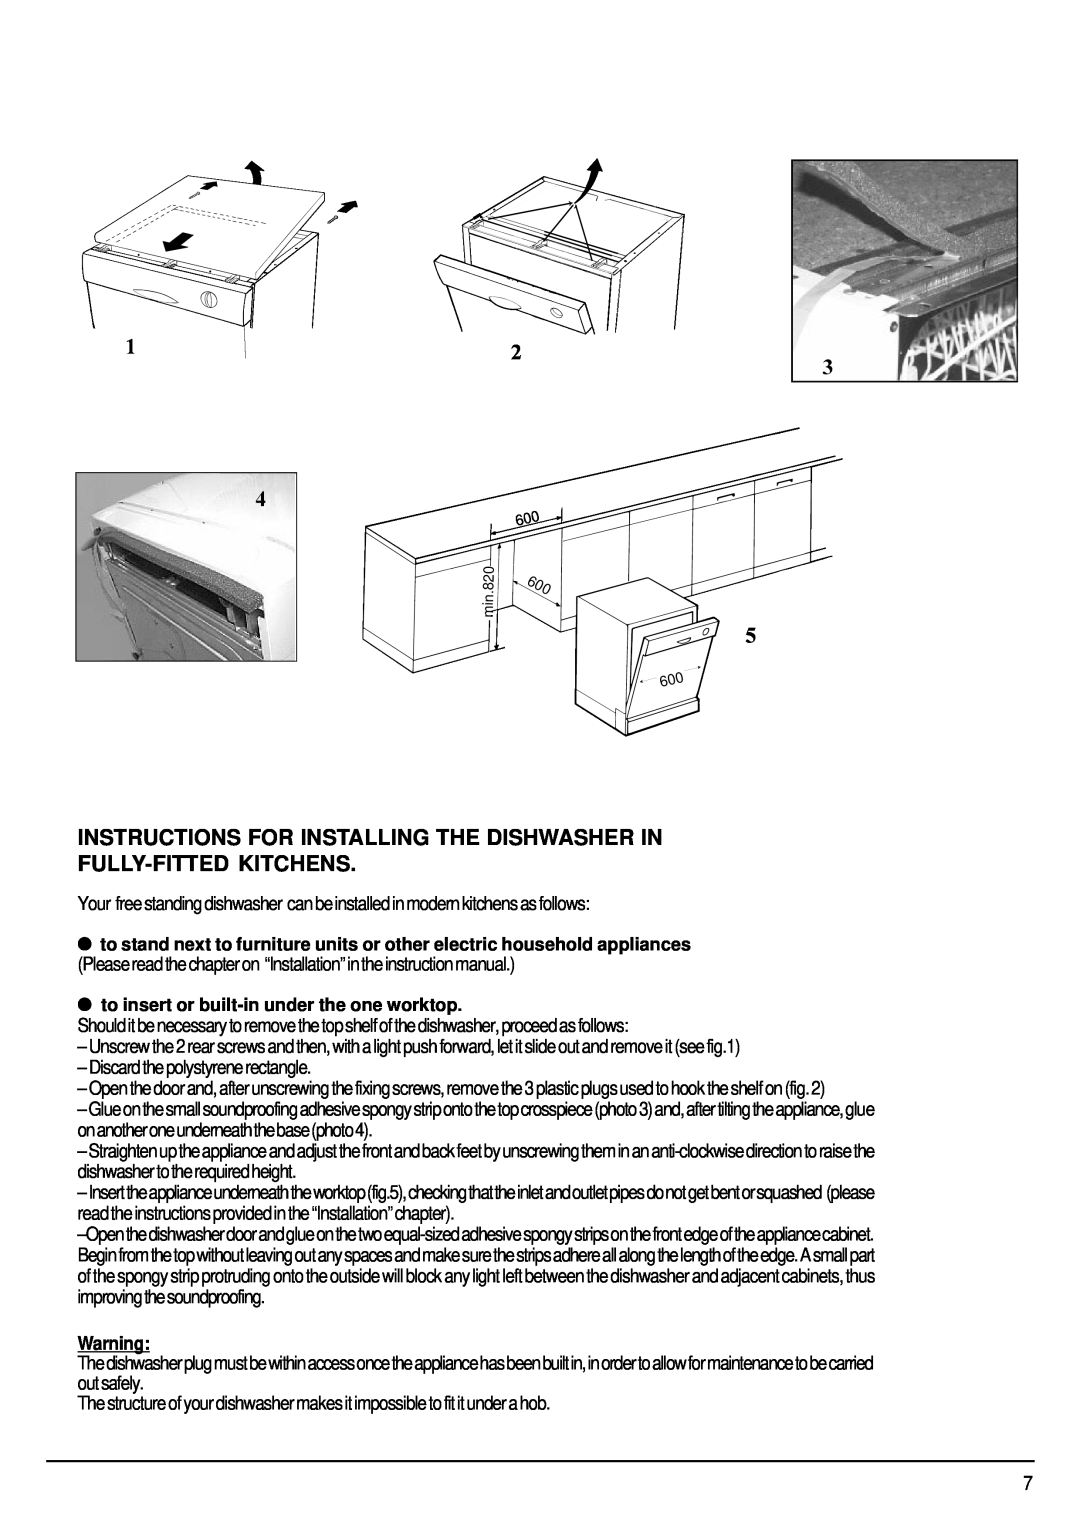 Hotpoint ULTIMA manual Instructions For Installing The Dishwasher In Fully-Fitted Kitchens, Discardthepolystyrenerectangle 